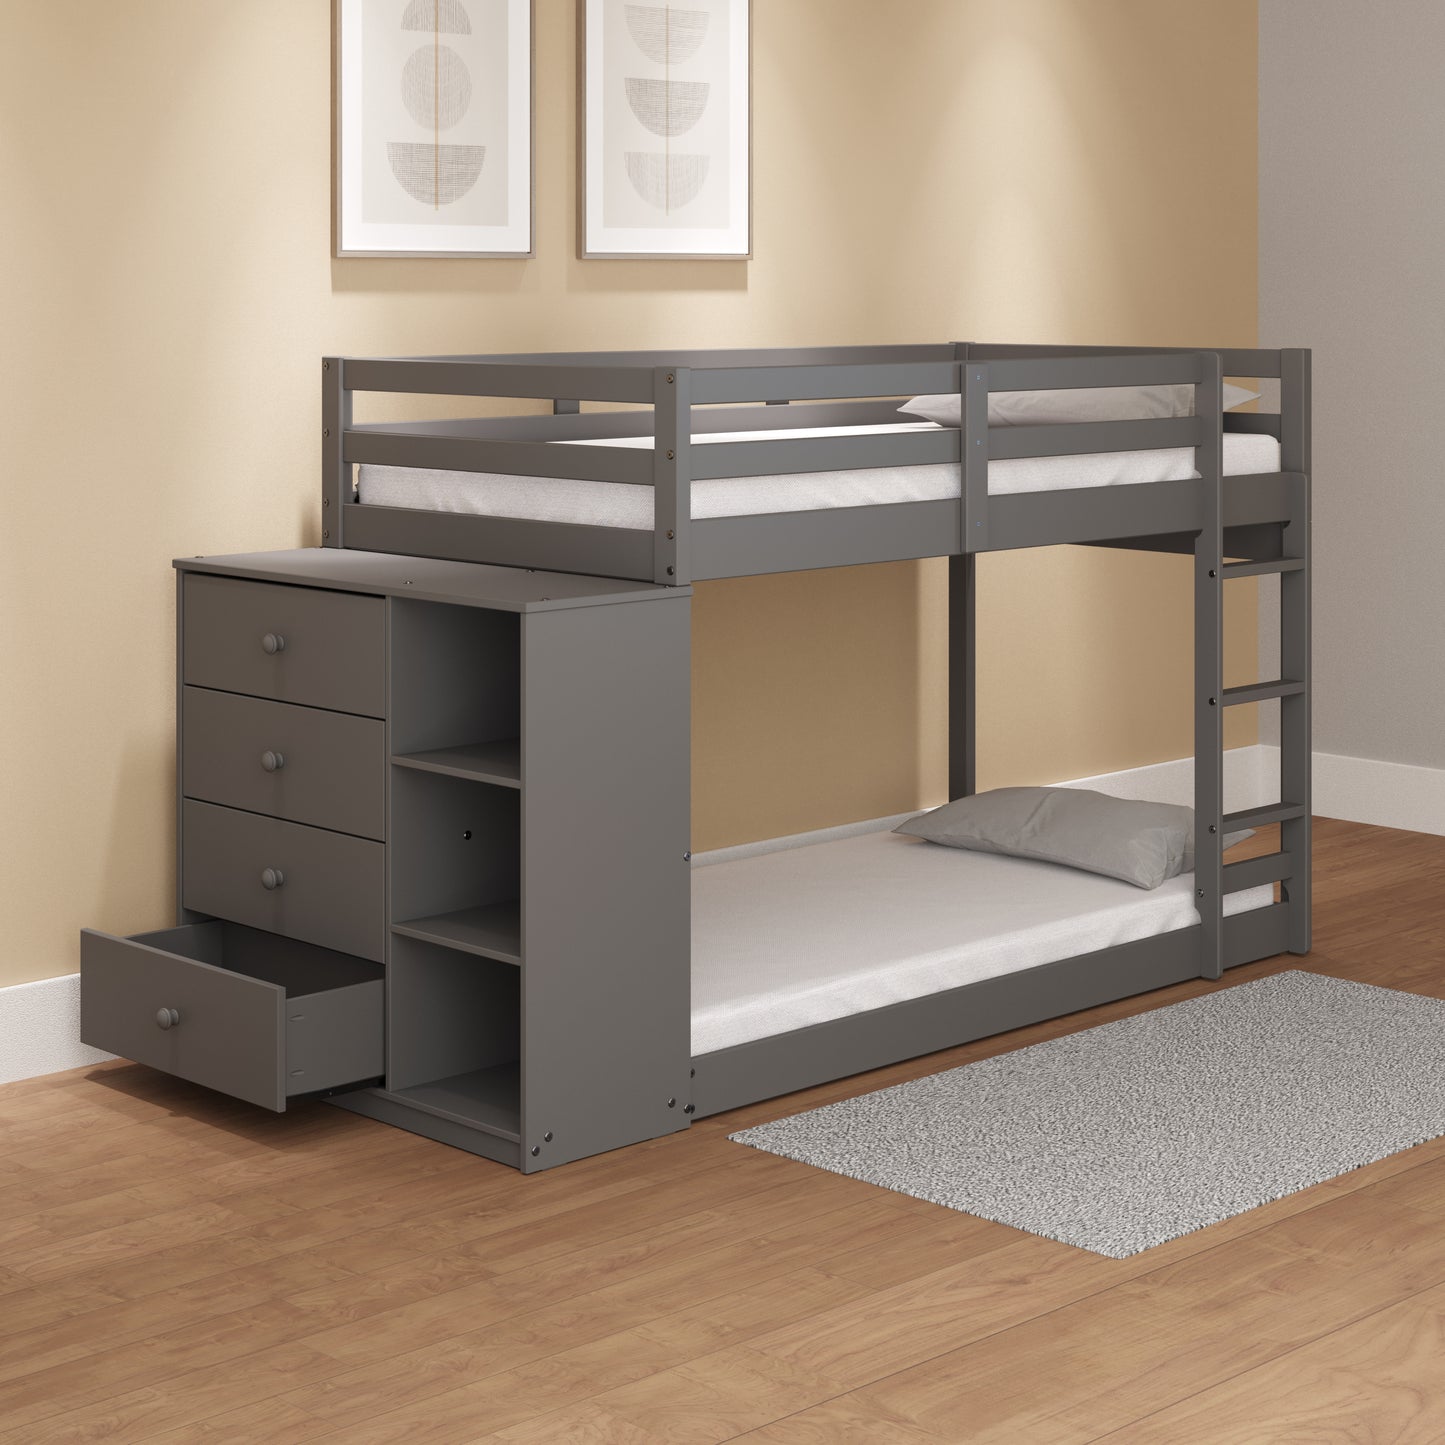 ACME Gaston Twin/Twin Bunk Bed w/Cabinet, Gray Finish BD01372 - Enova Luxe Home Store